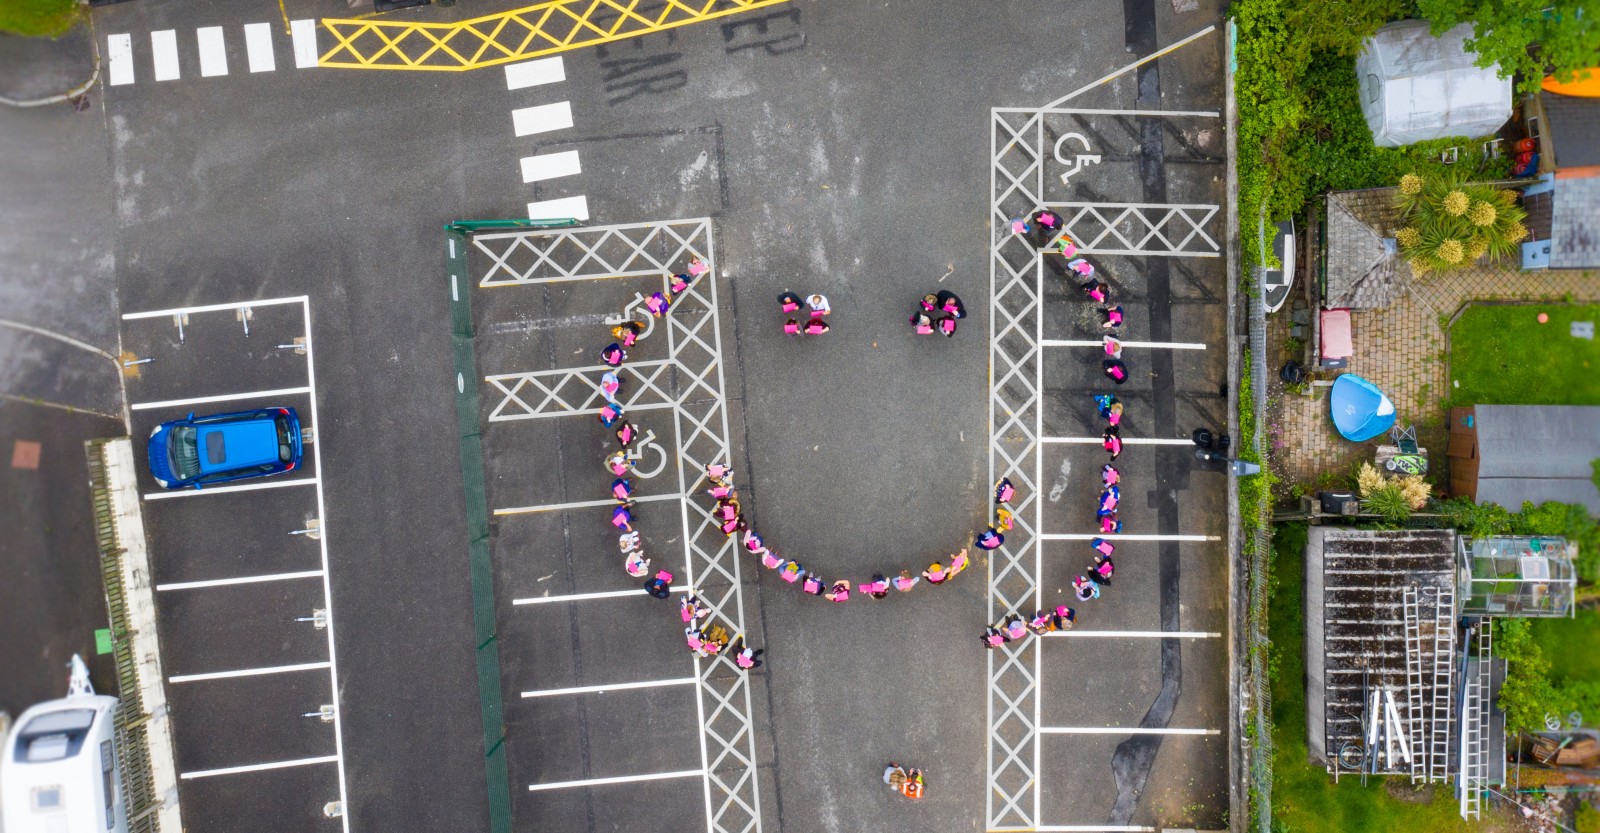 People stood in a smiley face formation  - seen from above